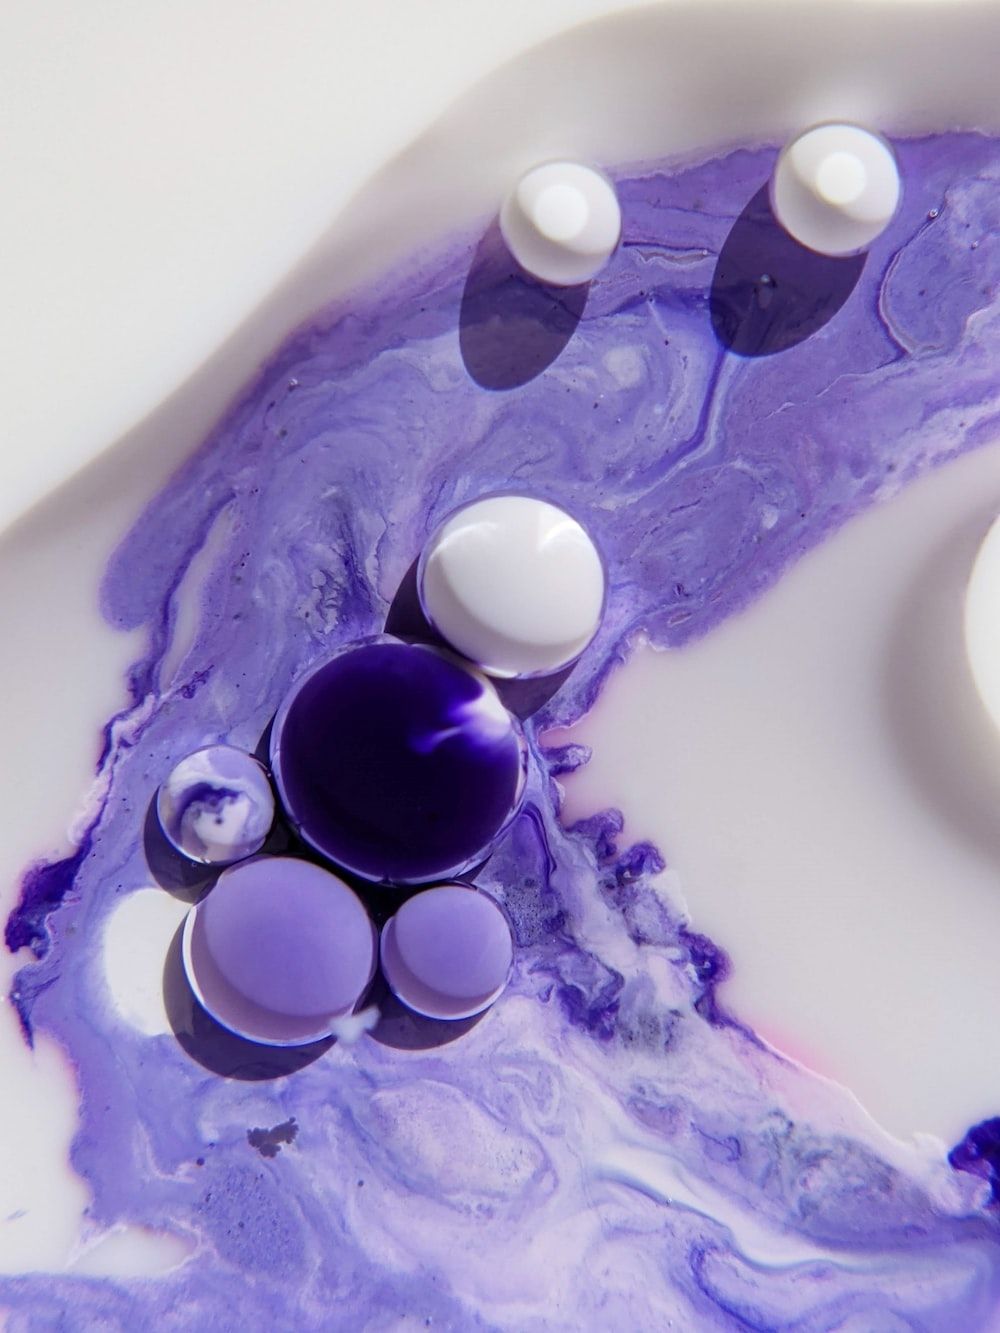 A close up of a purple and white object photo